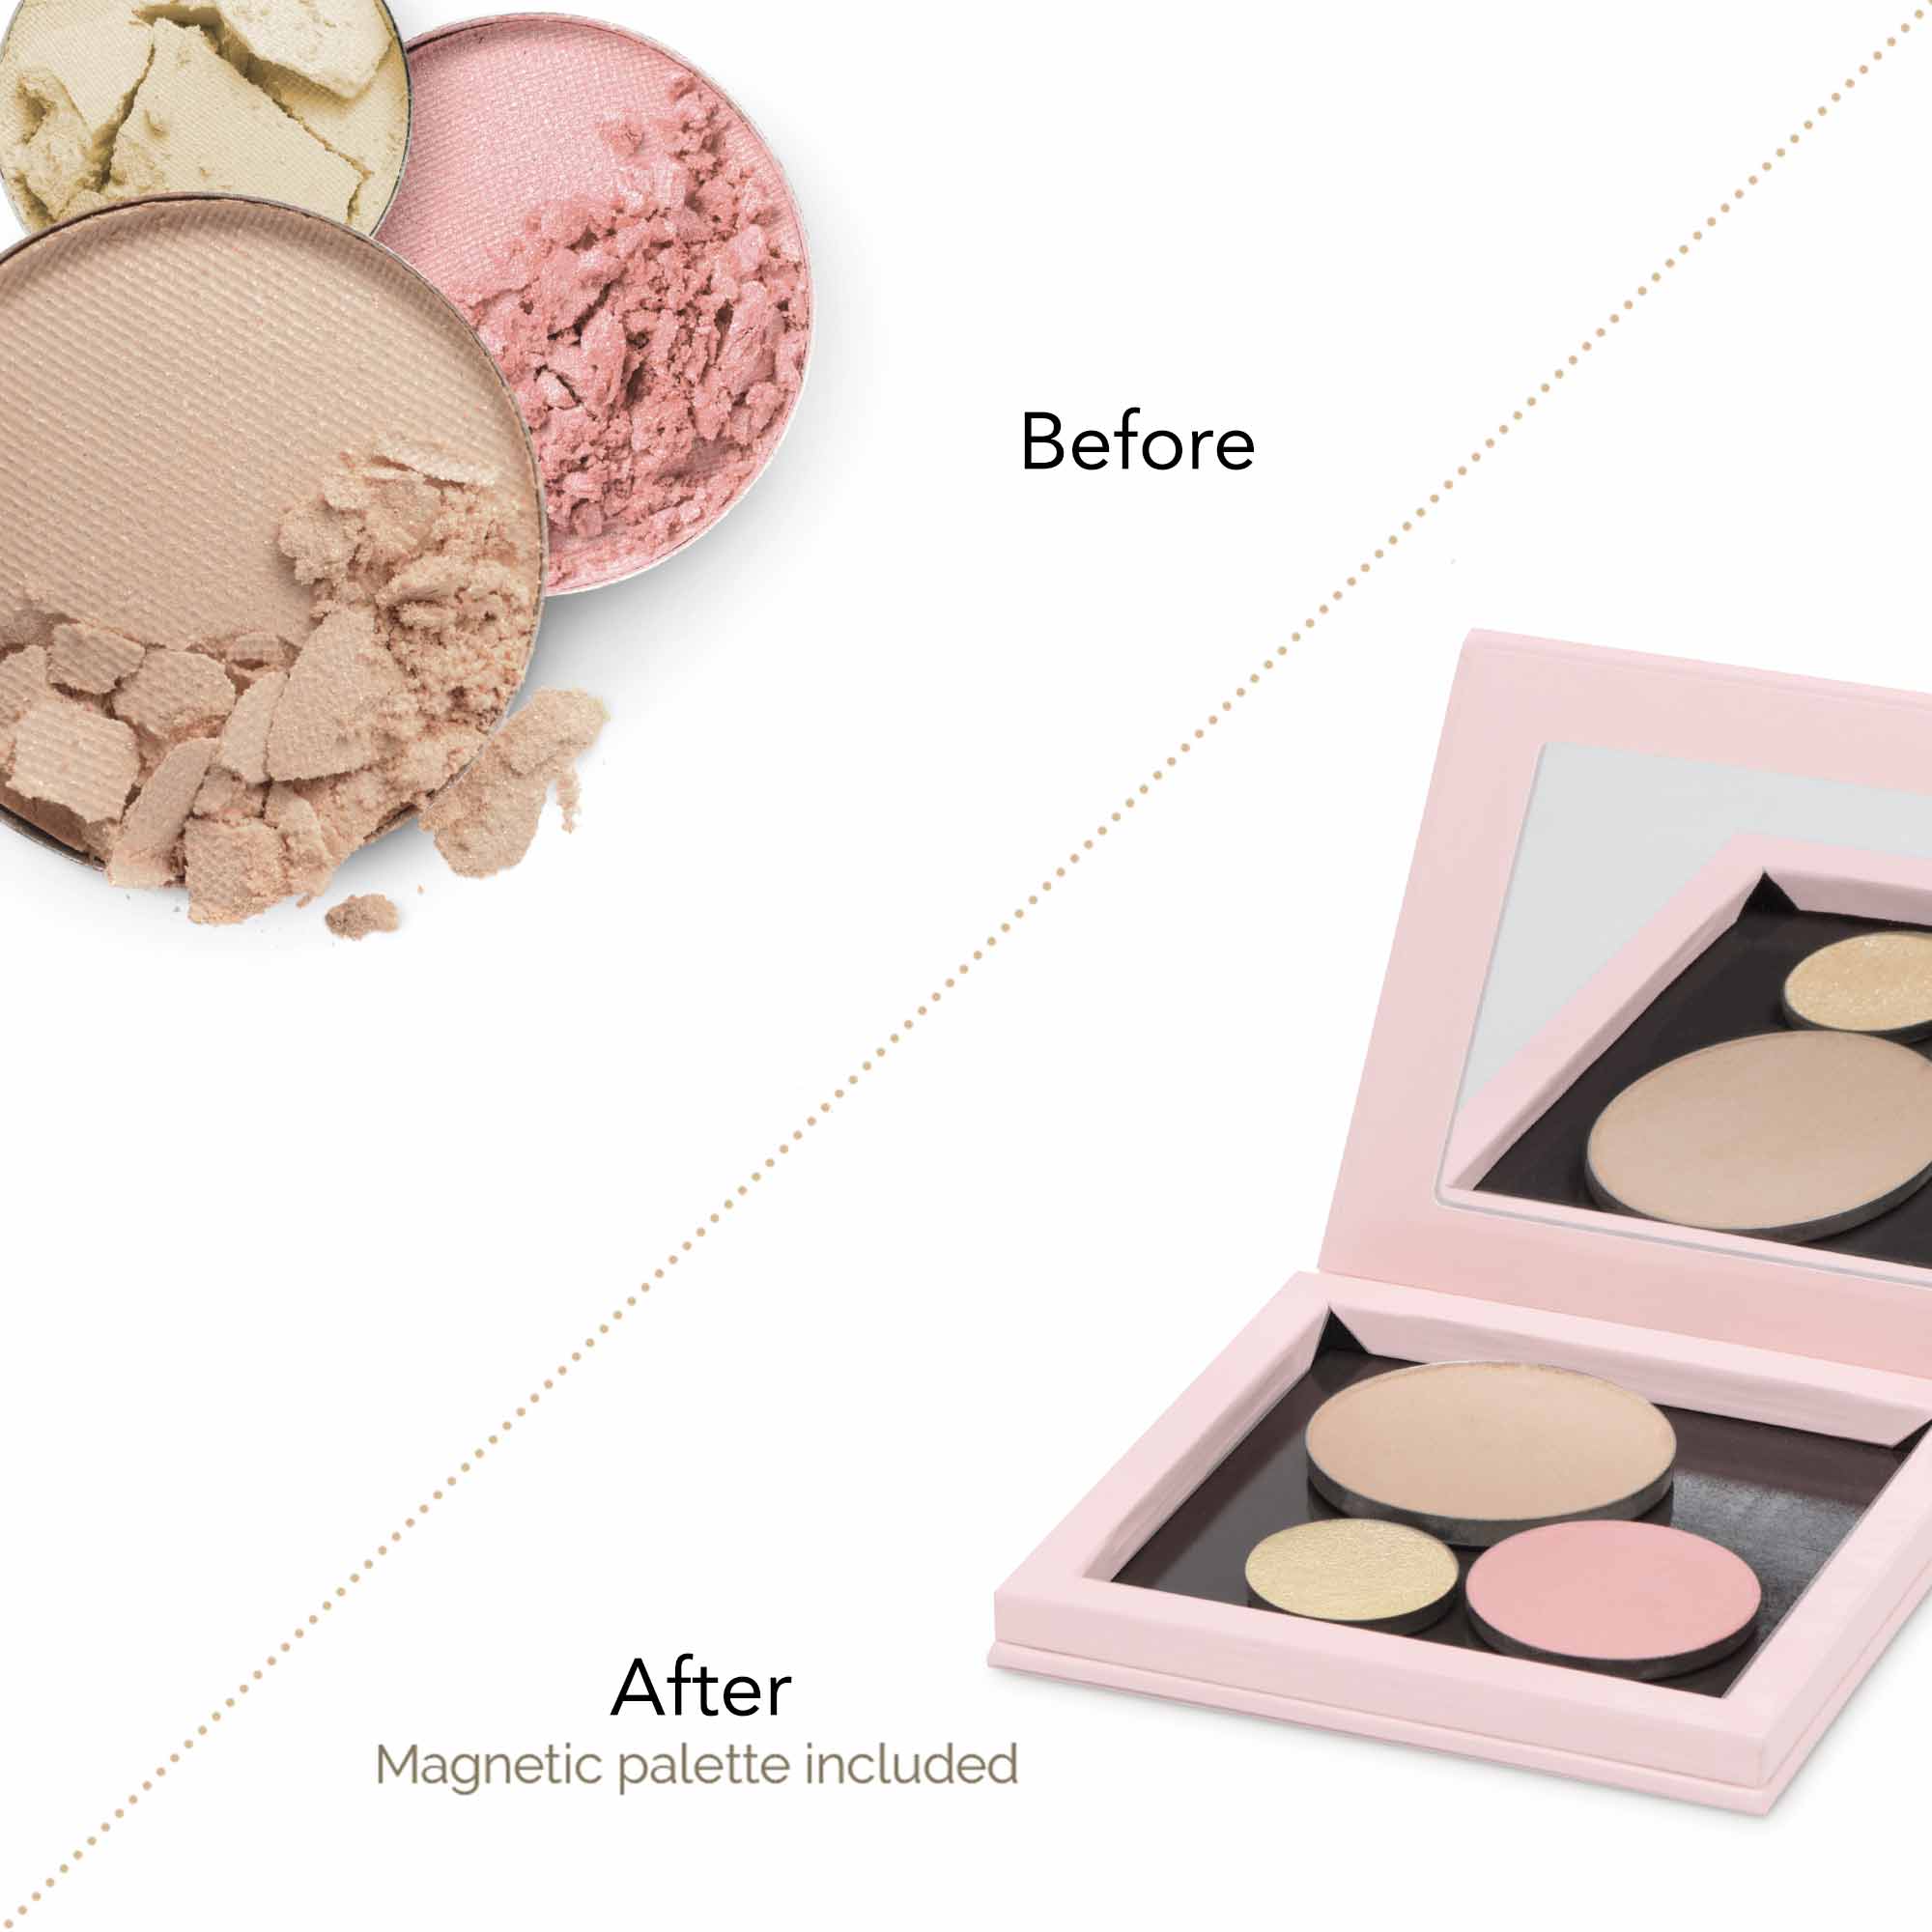 Before and after showing broken makeup and makeup that is fixed and repaired using the FIXY kit. Makeup is in a magnetic palette